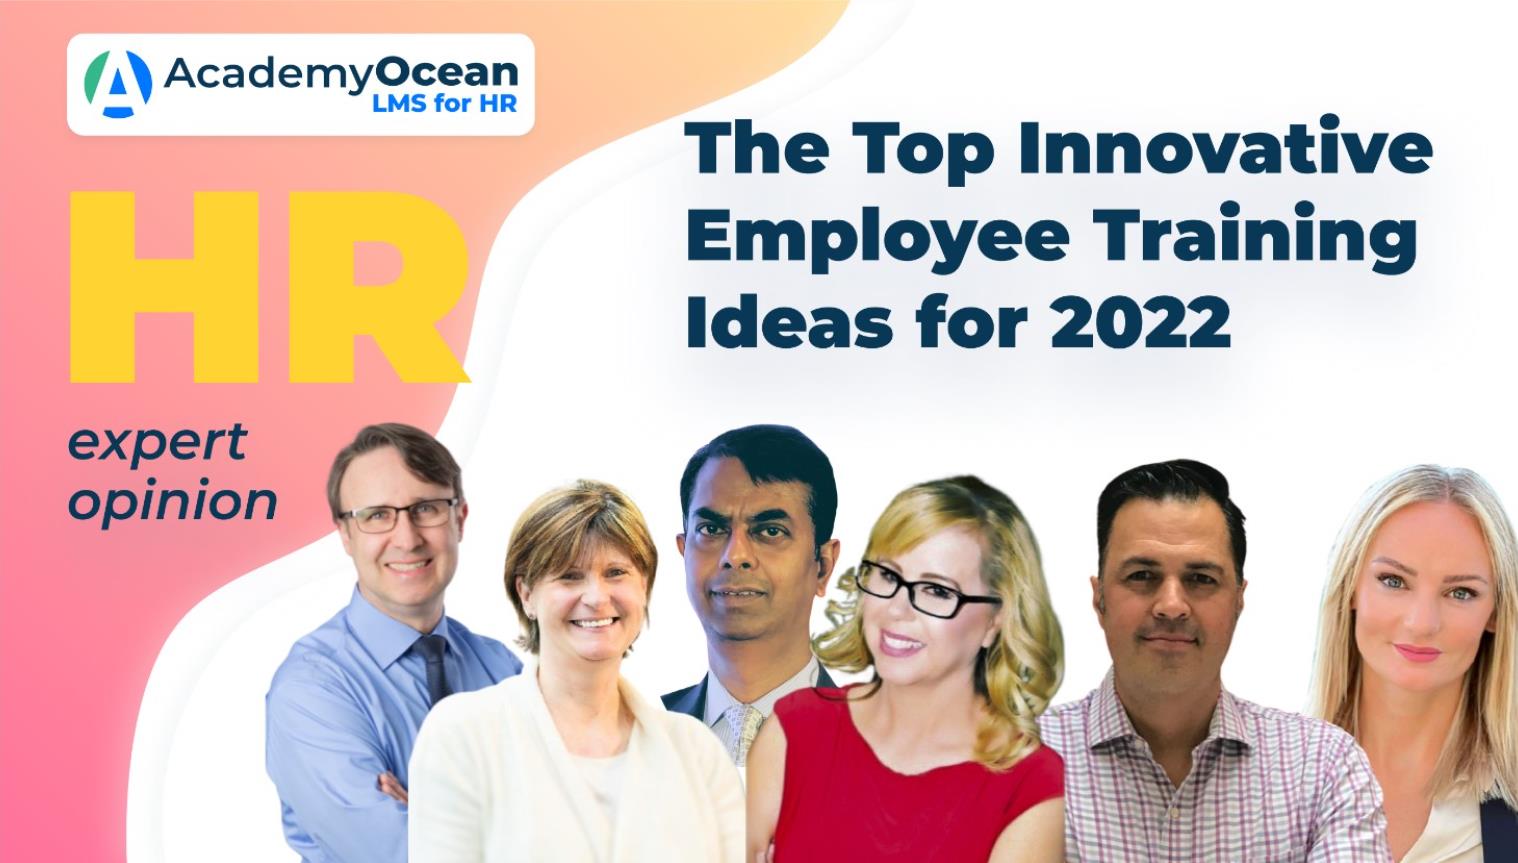 HR experts about Top Innovative Employee Training Ideas